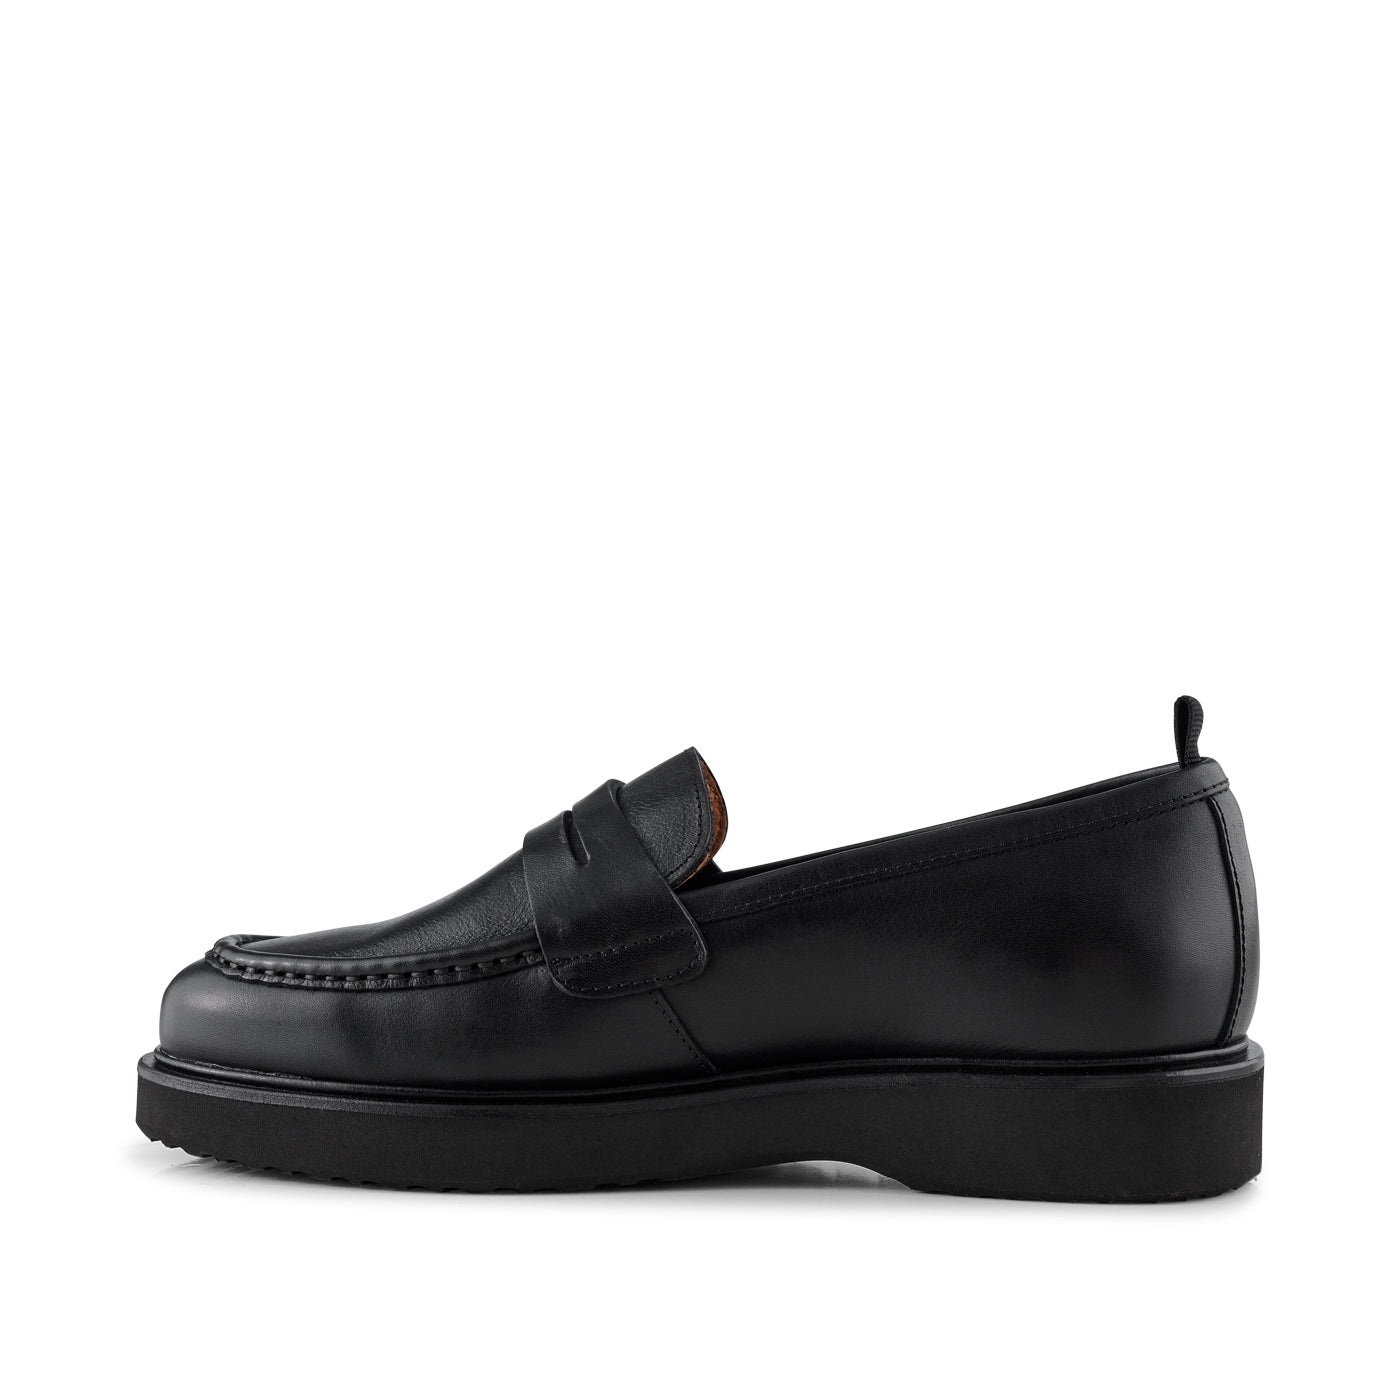 SHOE THE BEAR MENS Cosmos loafer leather Loafers 110 BLACK